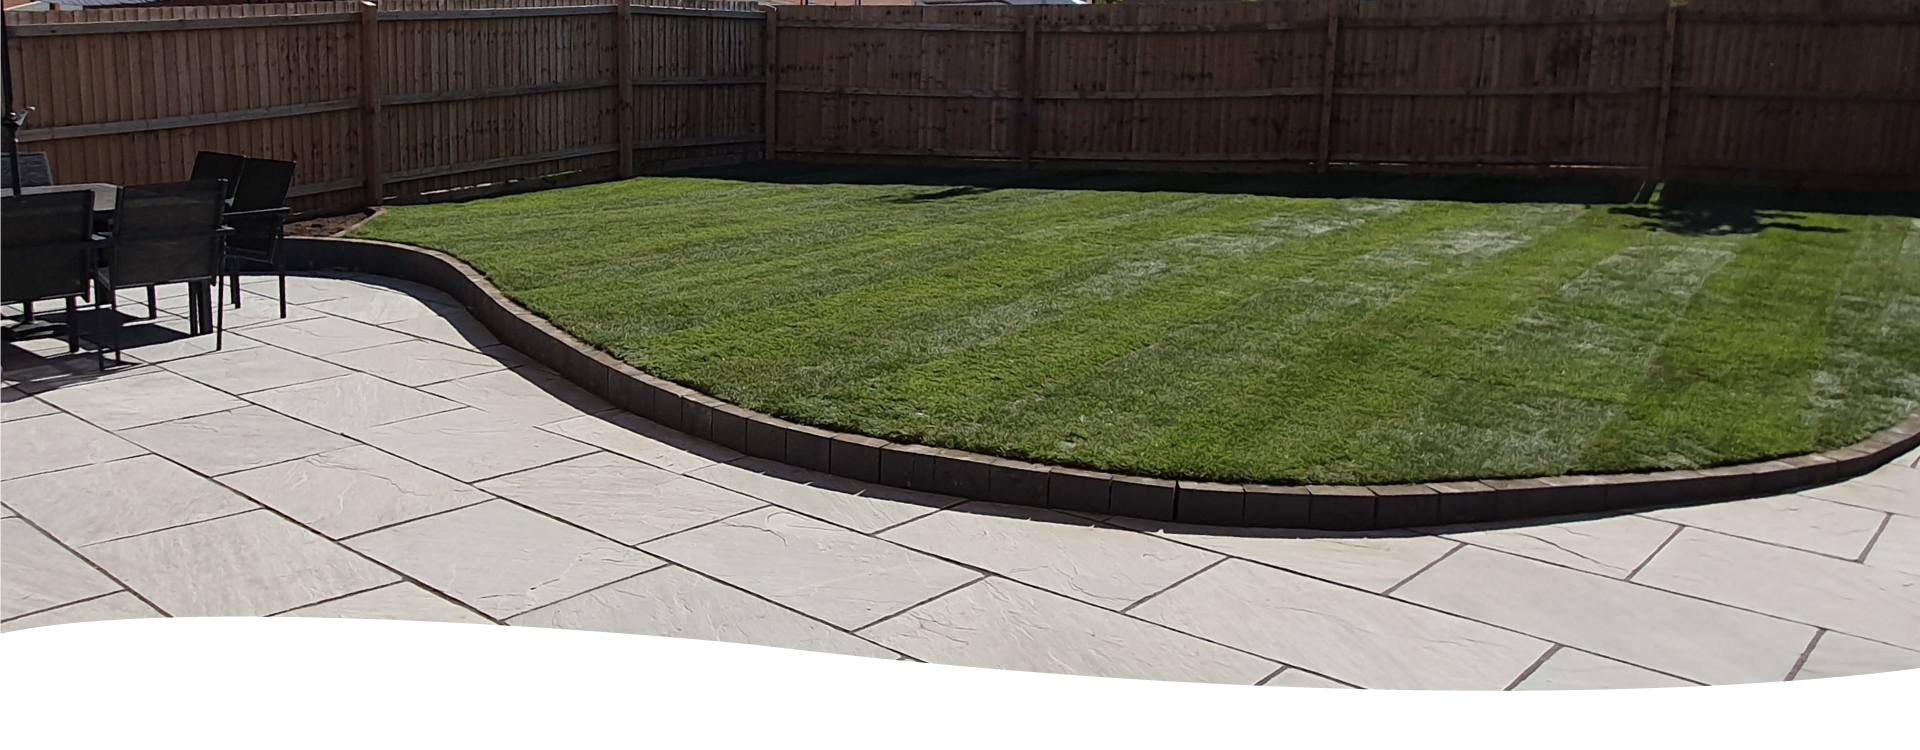 RJS-Landscaping-Fencing-turfing-decking